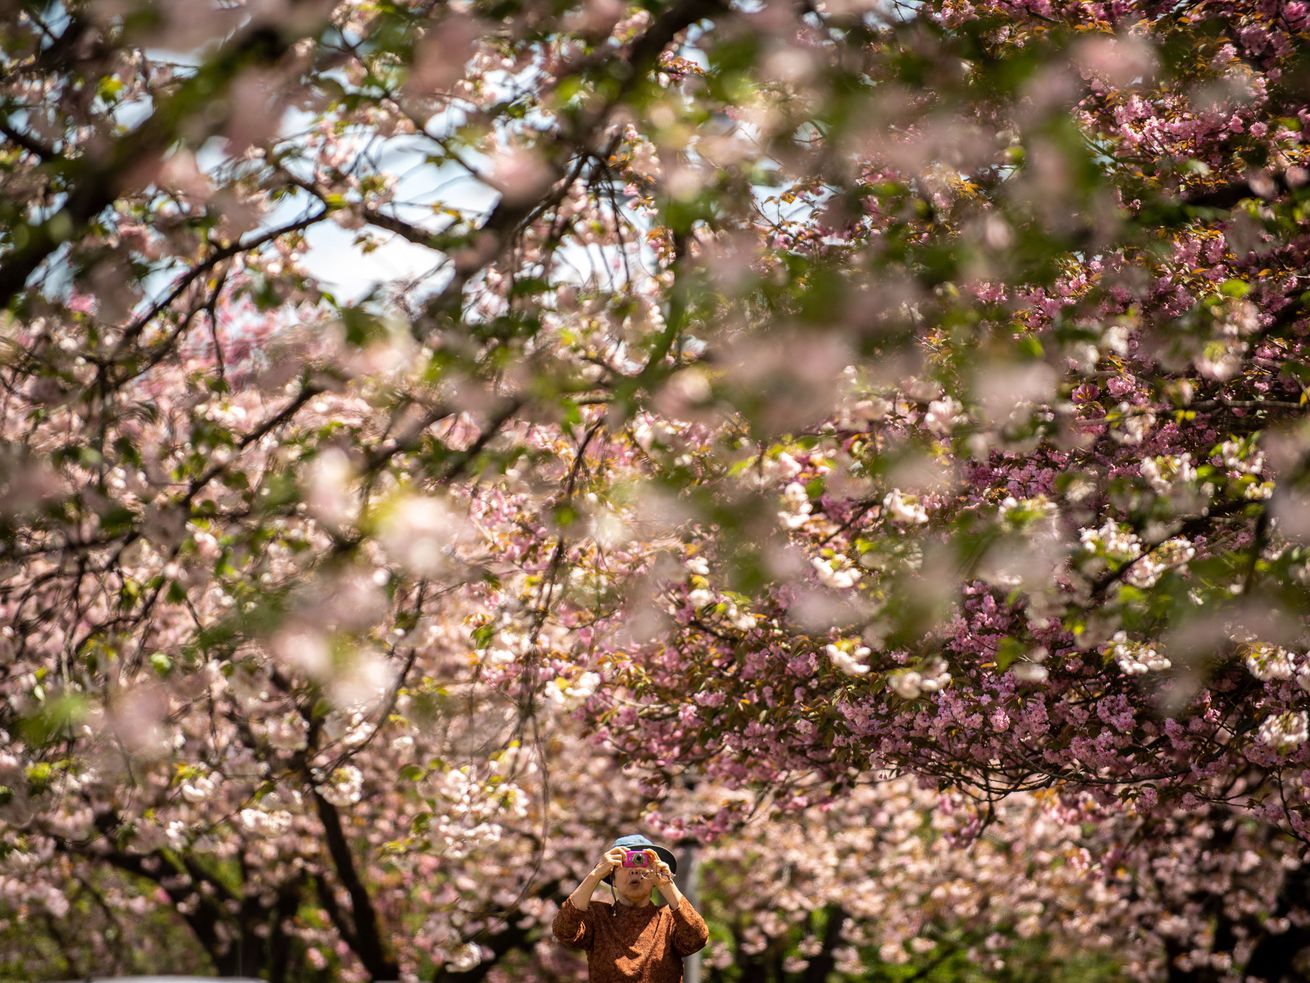 One Good Thing: Watching the cherry blossoms in the end times